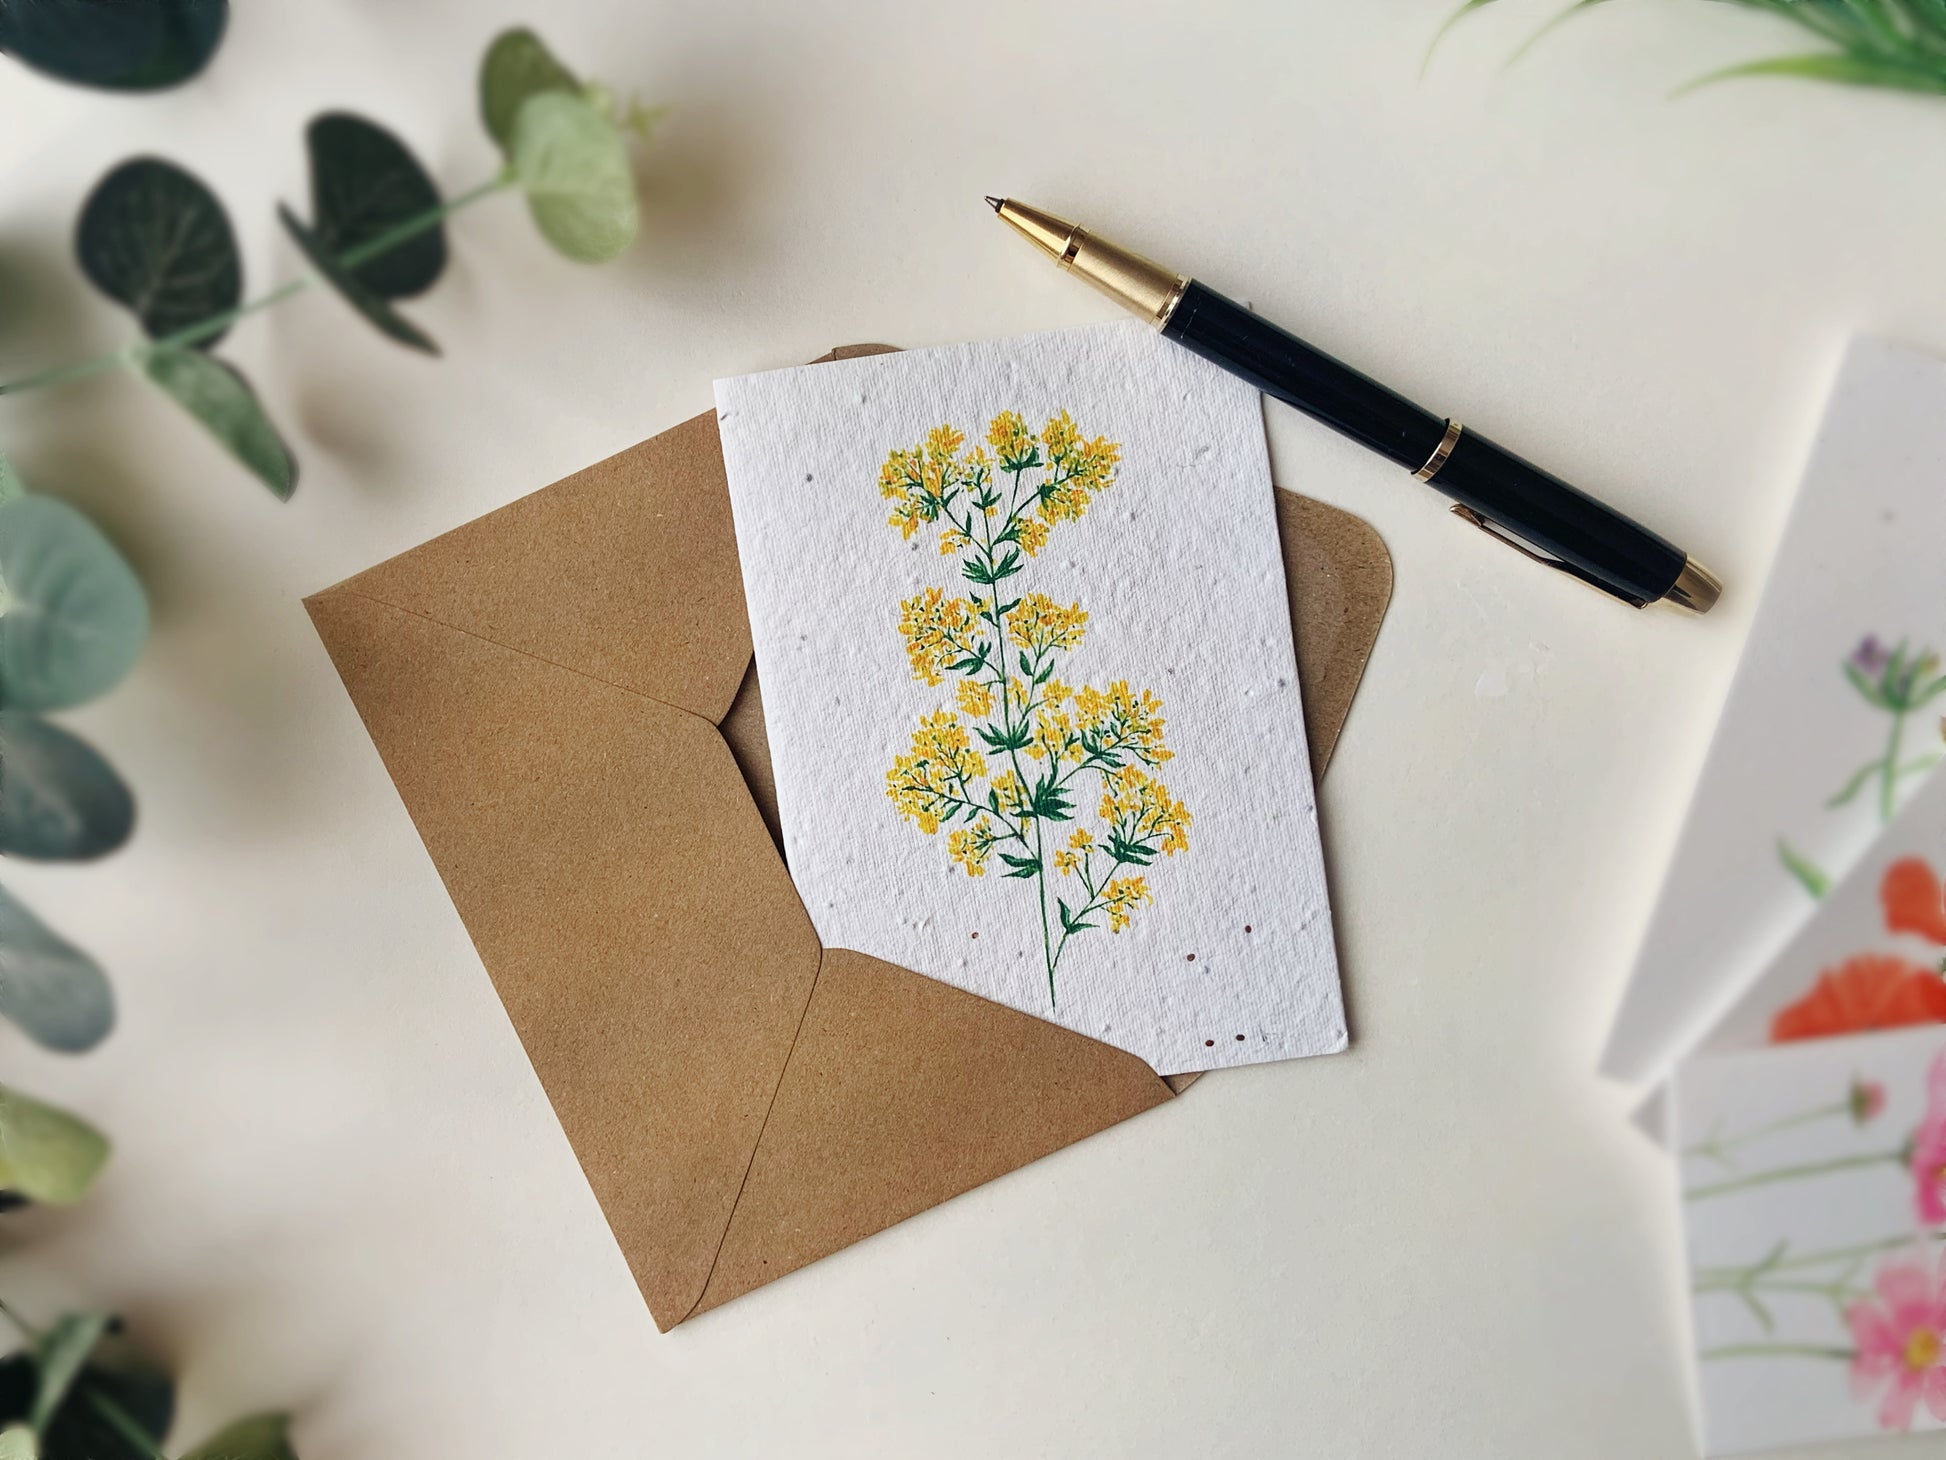 yellow wildflower seeded card, on a blurred background with a parker pen and eucalyptus leaf